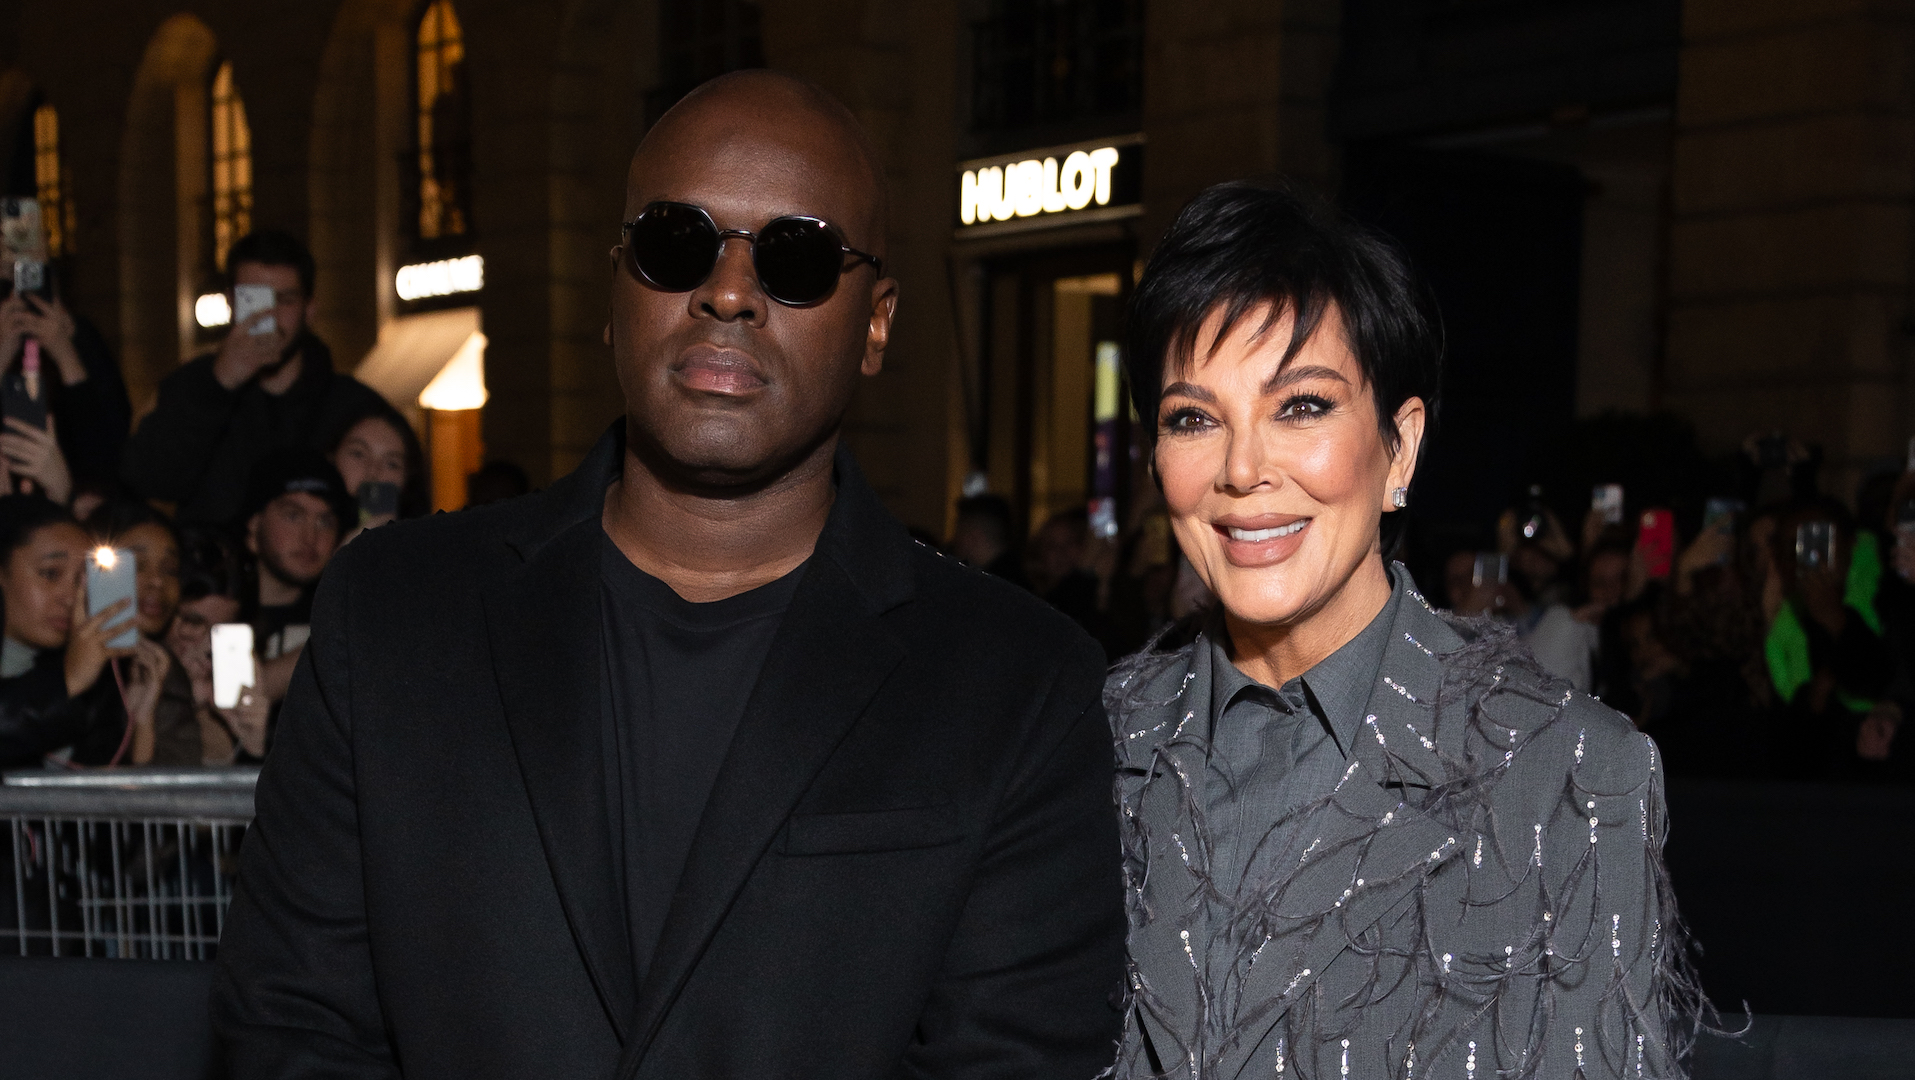 Kris Jenner with her bodyguard/bae